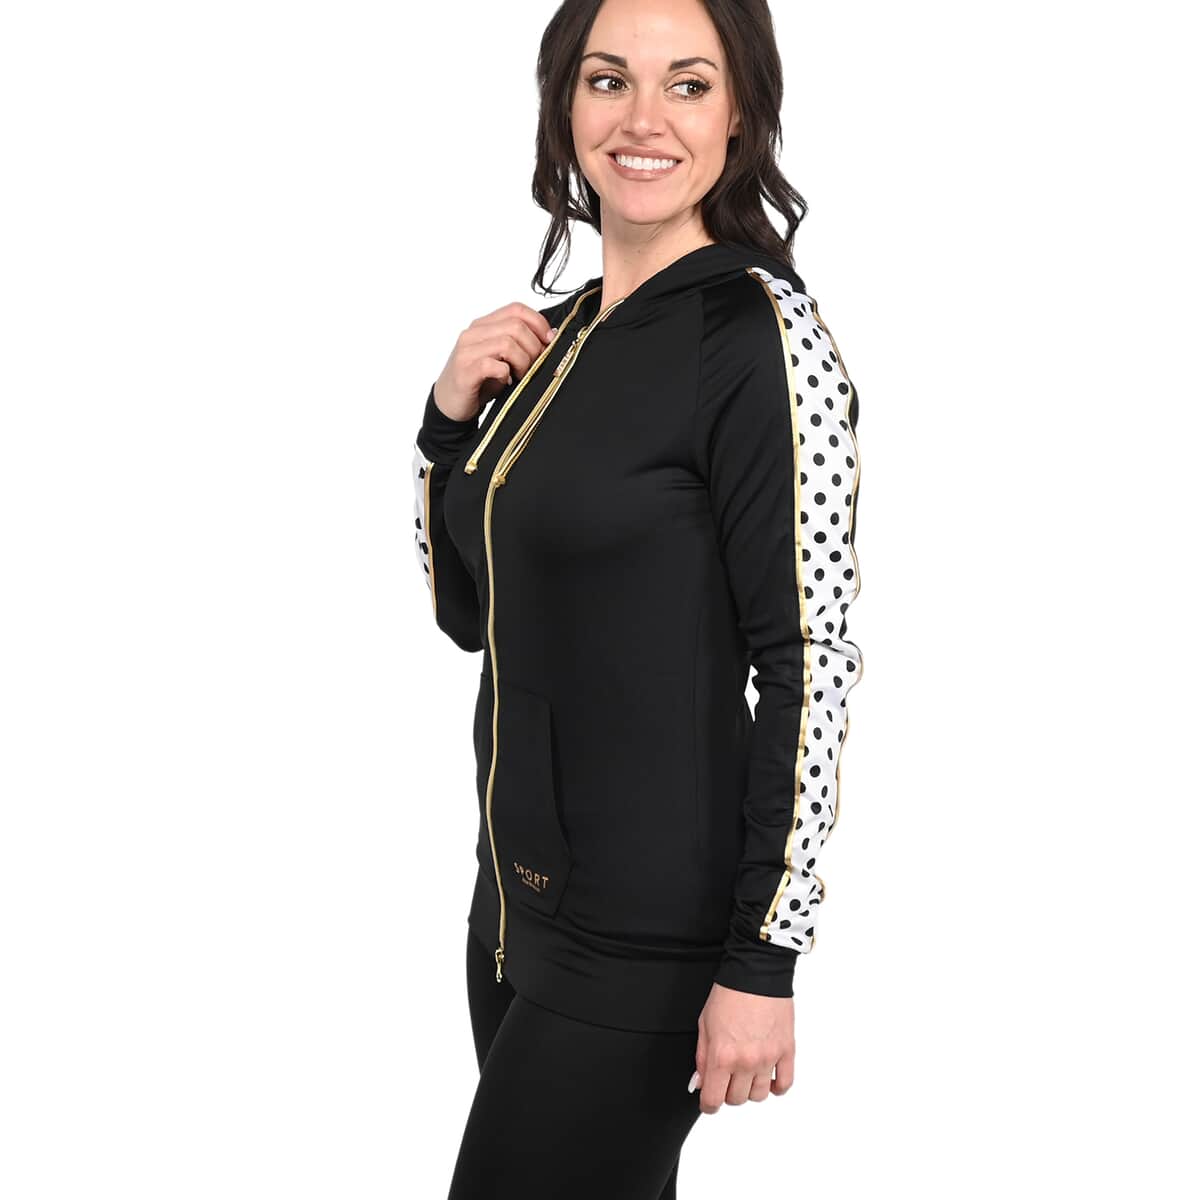 ISAAC MIZRAHI Black with Checkered Sleeve Hooded Zip-up Sport Jacket - XL image number 2